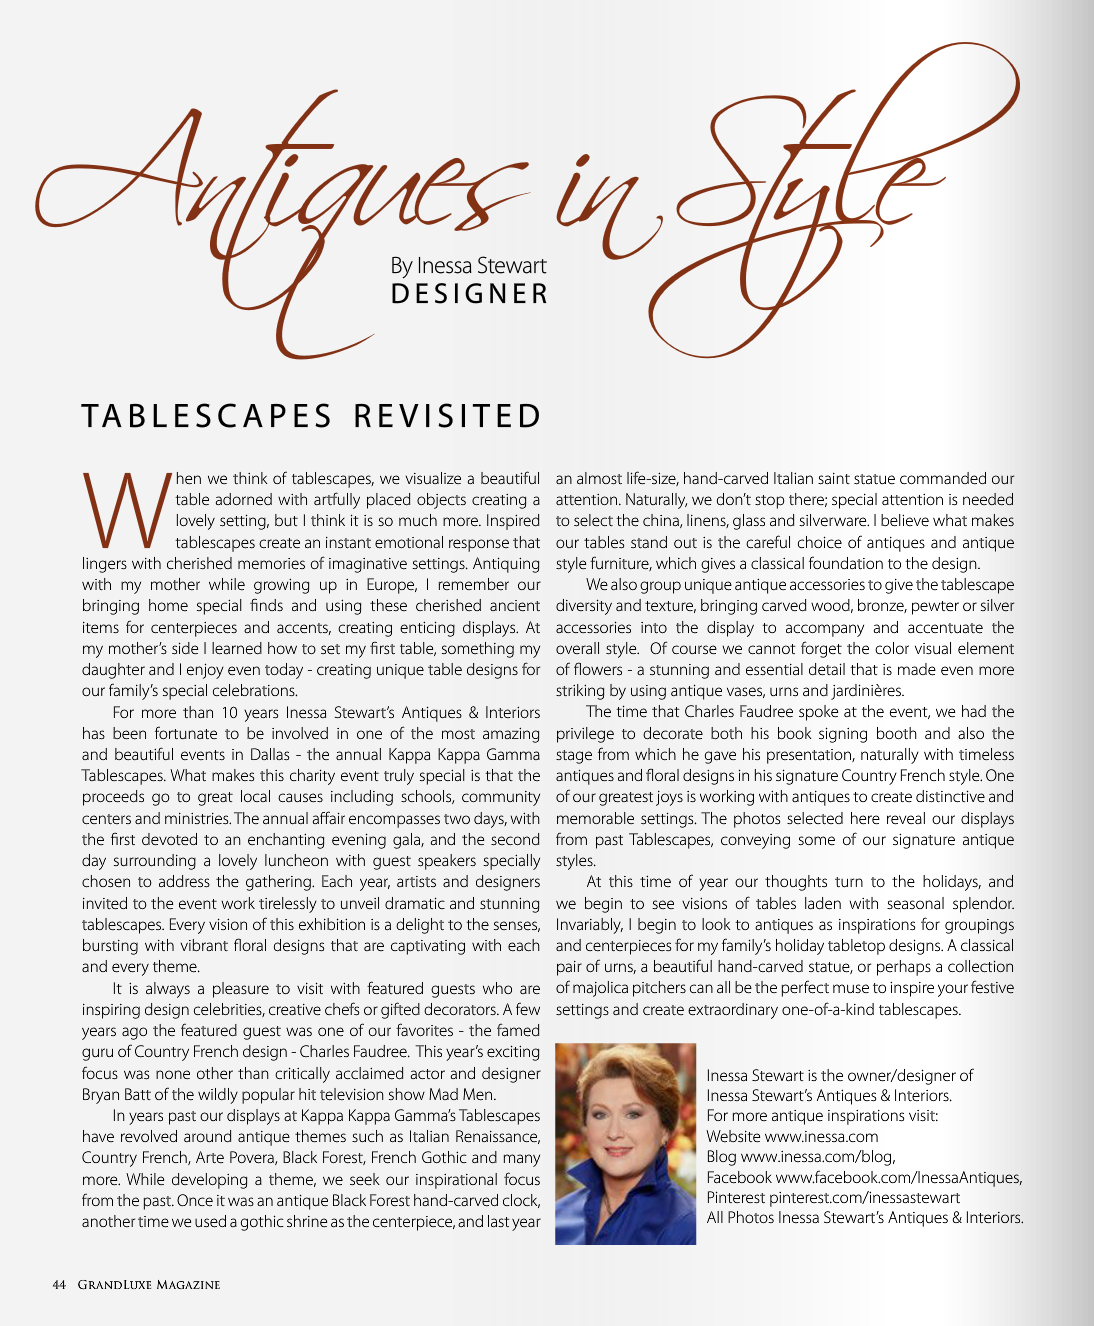 Antiques in Style-Grand Luxe Magazine